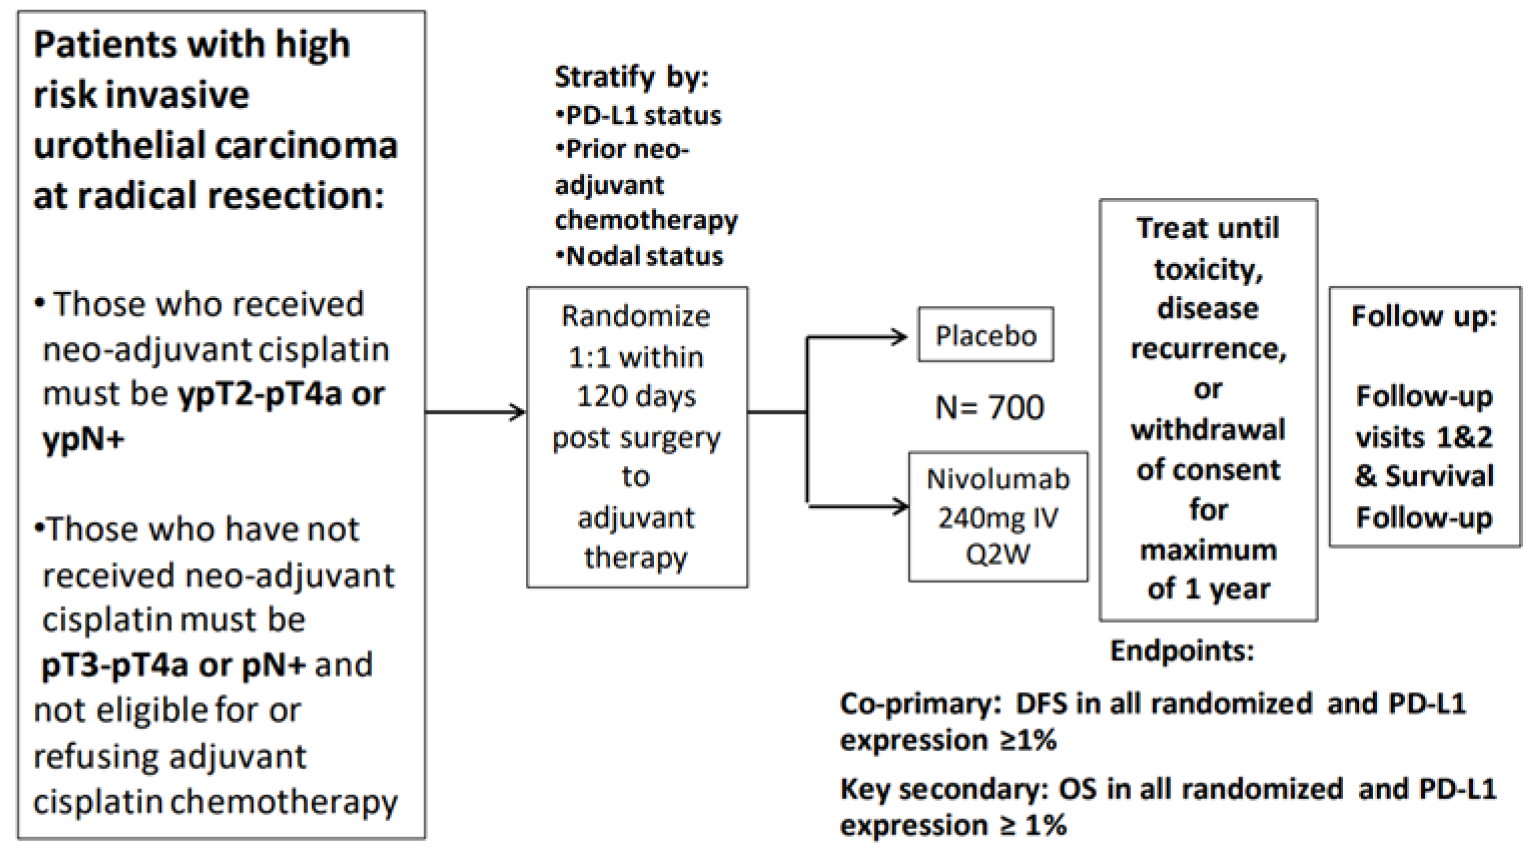 This figure summarizes the overall design of the CheckMate 274 trial. Patients meeting eligibility criteria (N = 700) were randomized and started treatment within 120 days post-surgery 1:1 to receive nivolumab 240 mg IV every 2 weeks or placebo. Randomization was stratified by PD-L1 status, prior neoadjuvant chemotherapy, and nodal status. Treatment was continued until toxicity, disease recurrence, or withdrawal of consent, for maximum 1 year. Patients were followed up for 2 visits within 100 days of the last dose and for survival.